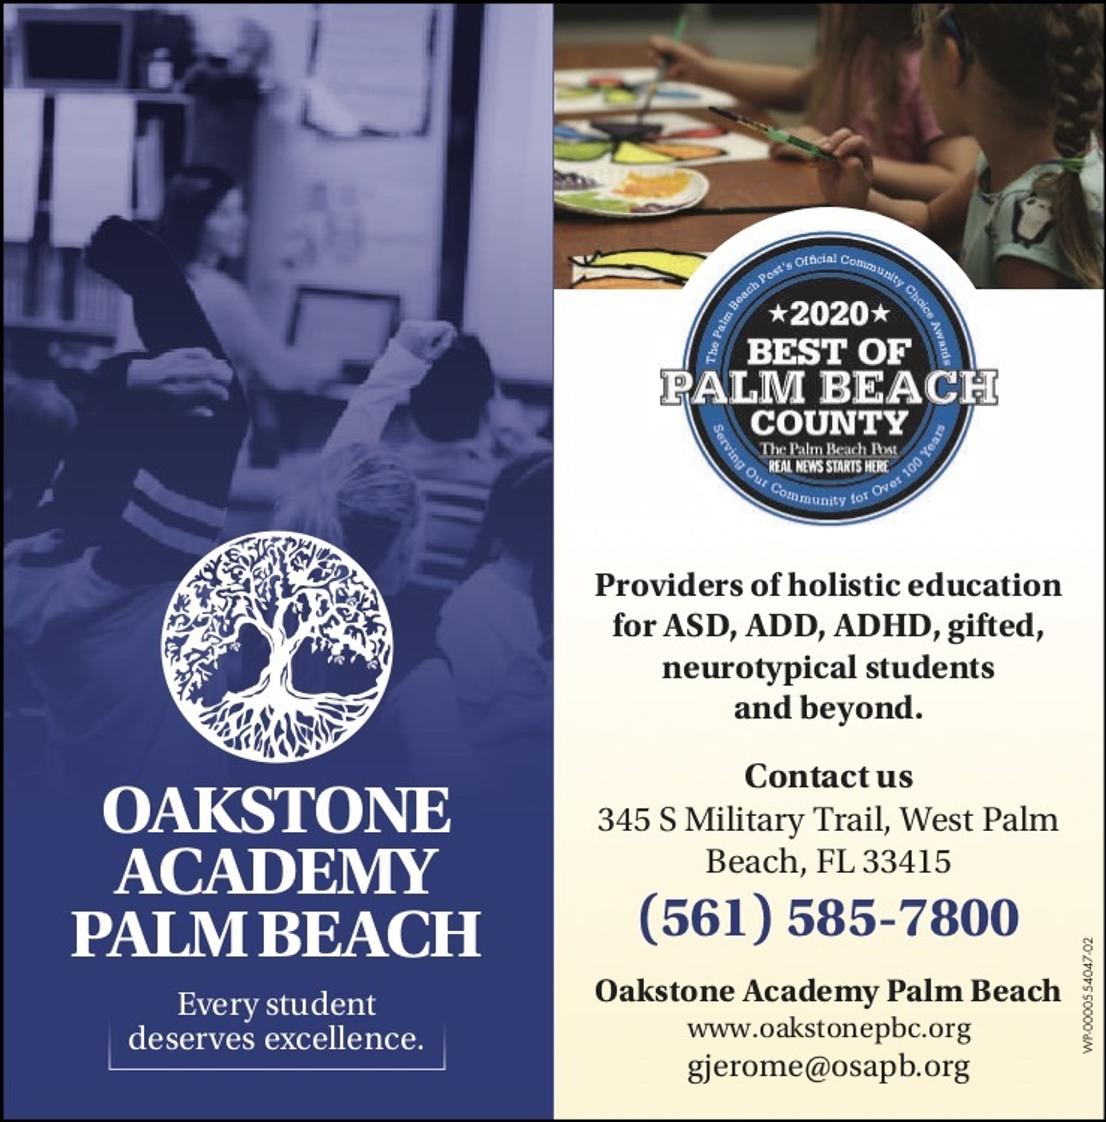 Oakstone Academy Palm Beach Corporation Photo #1 - Oakstone was nominated as one of the top 3 private schools in Palm Beach County!